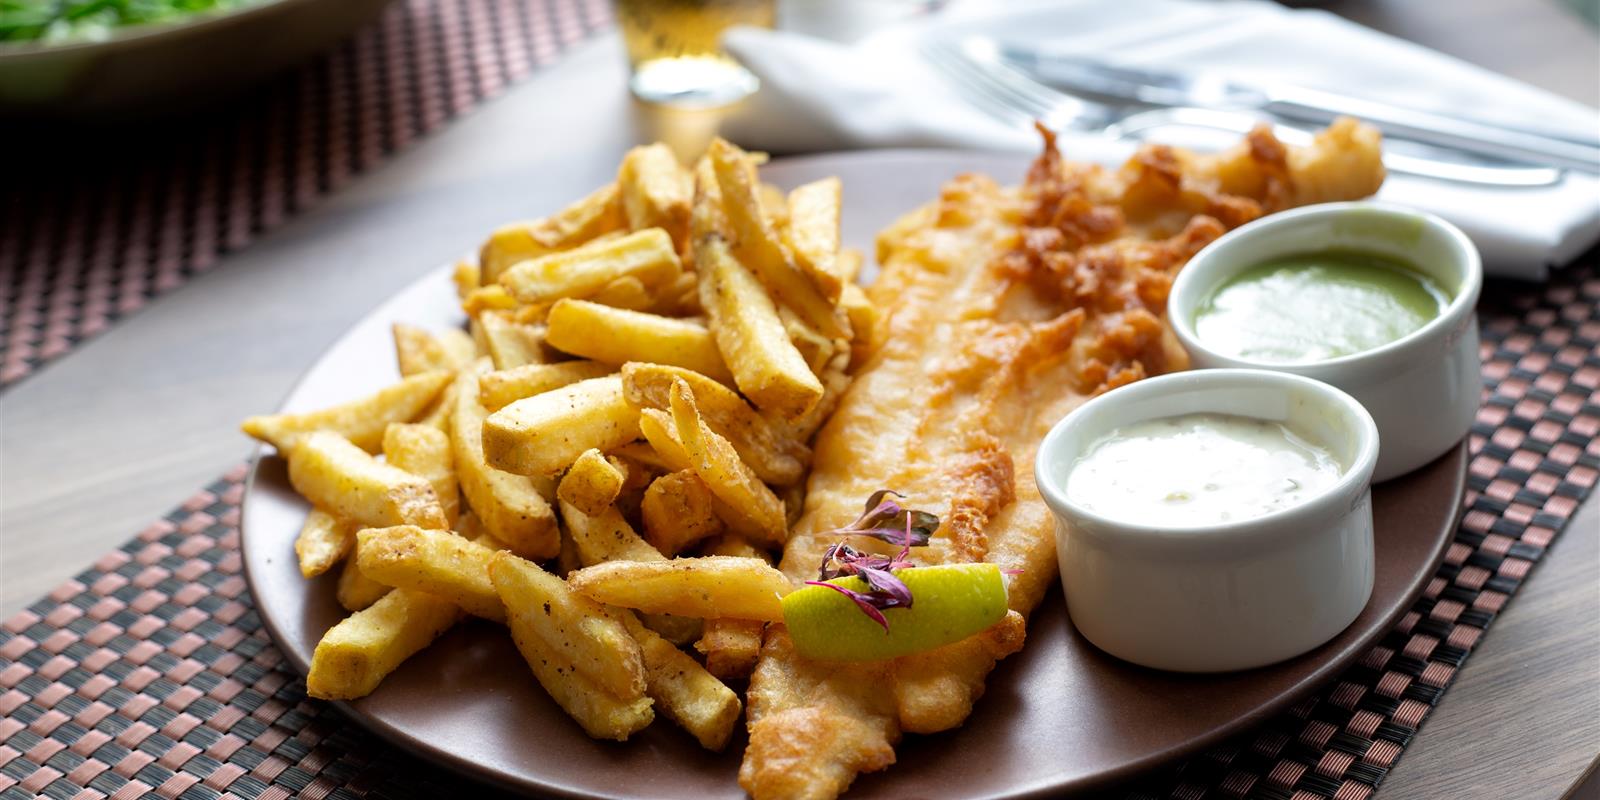 botanica restaurant fish and chips in London city centre